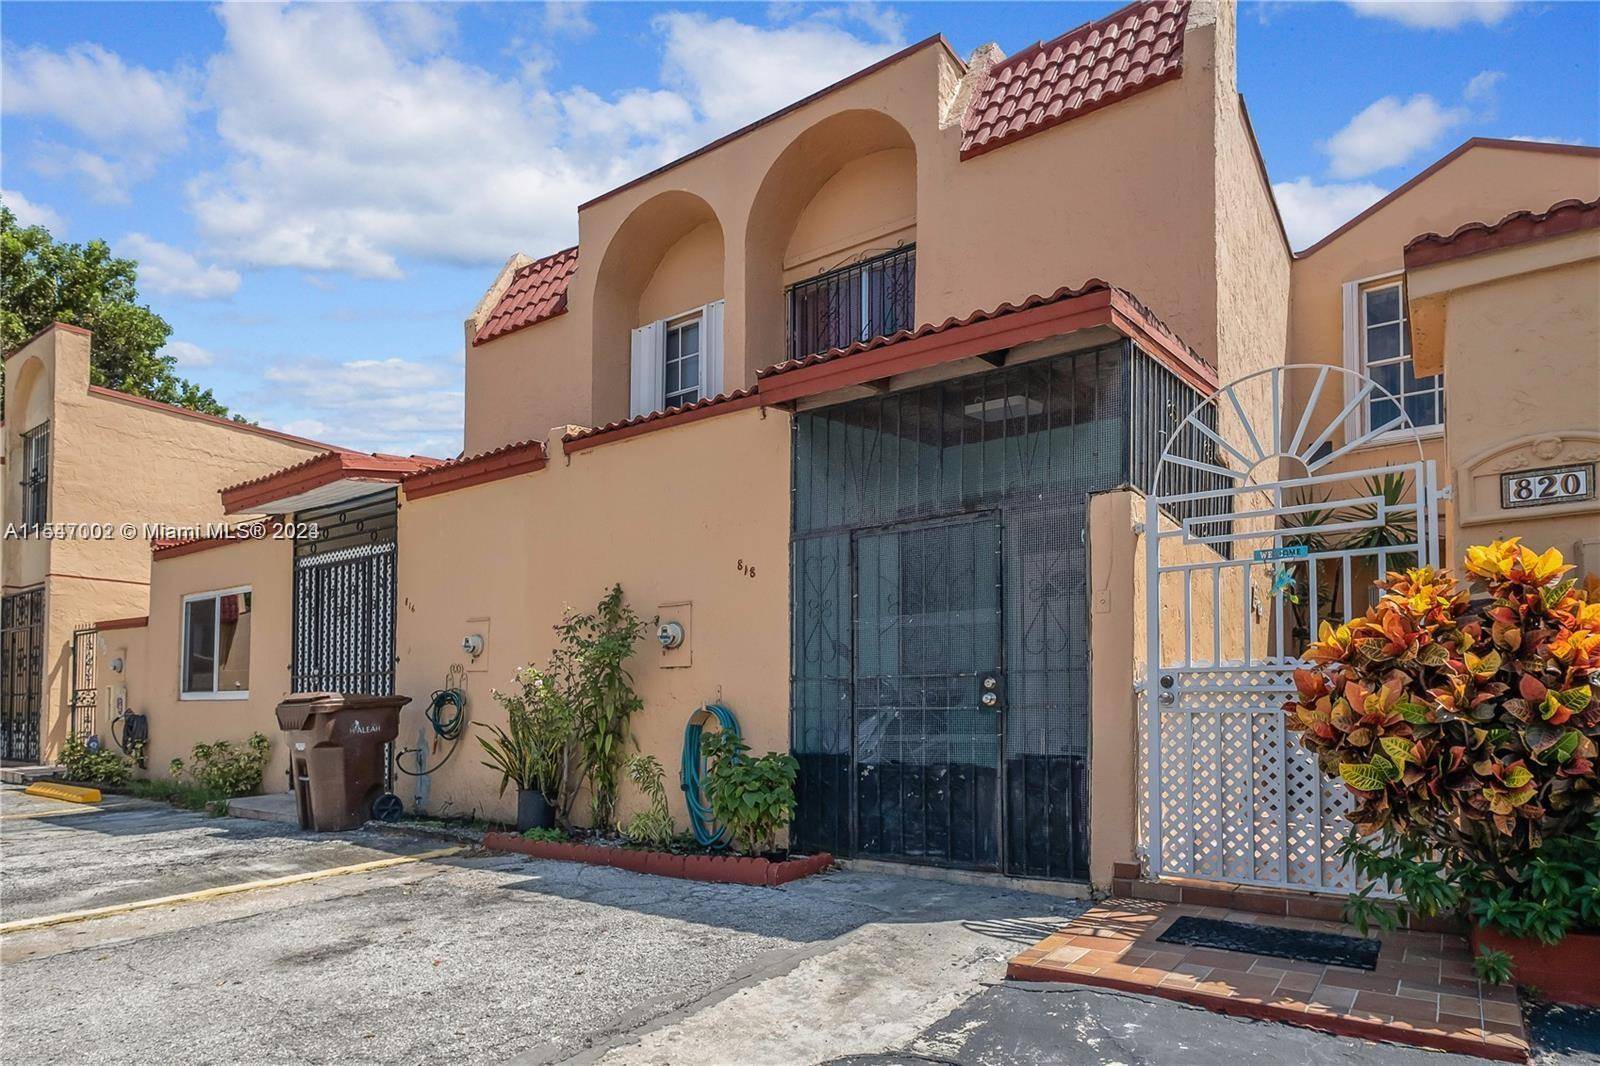 Spacious Townhouse in the heart of Hialeah.